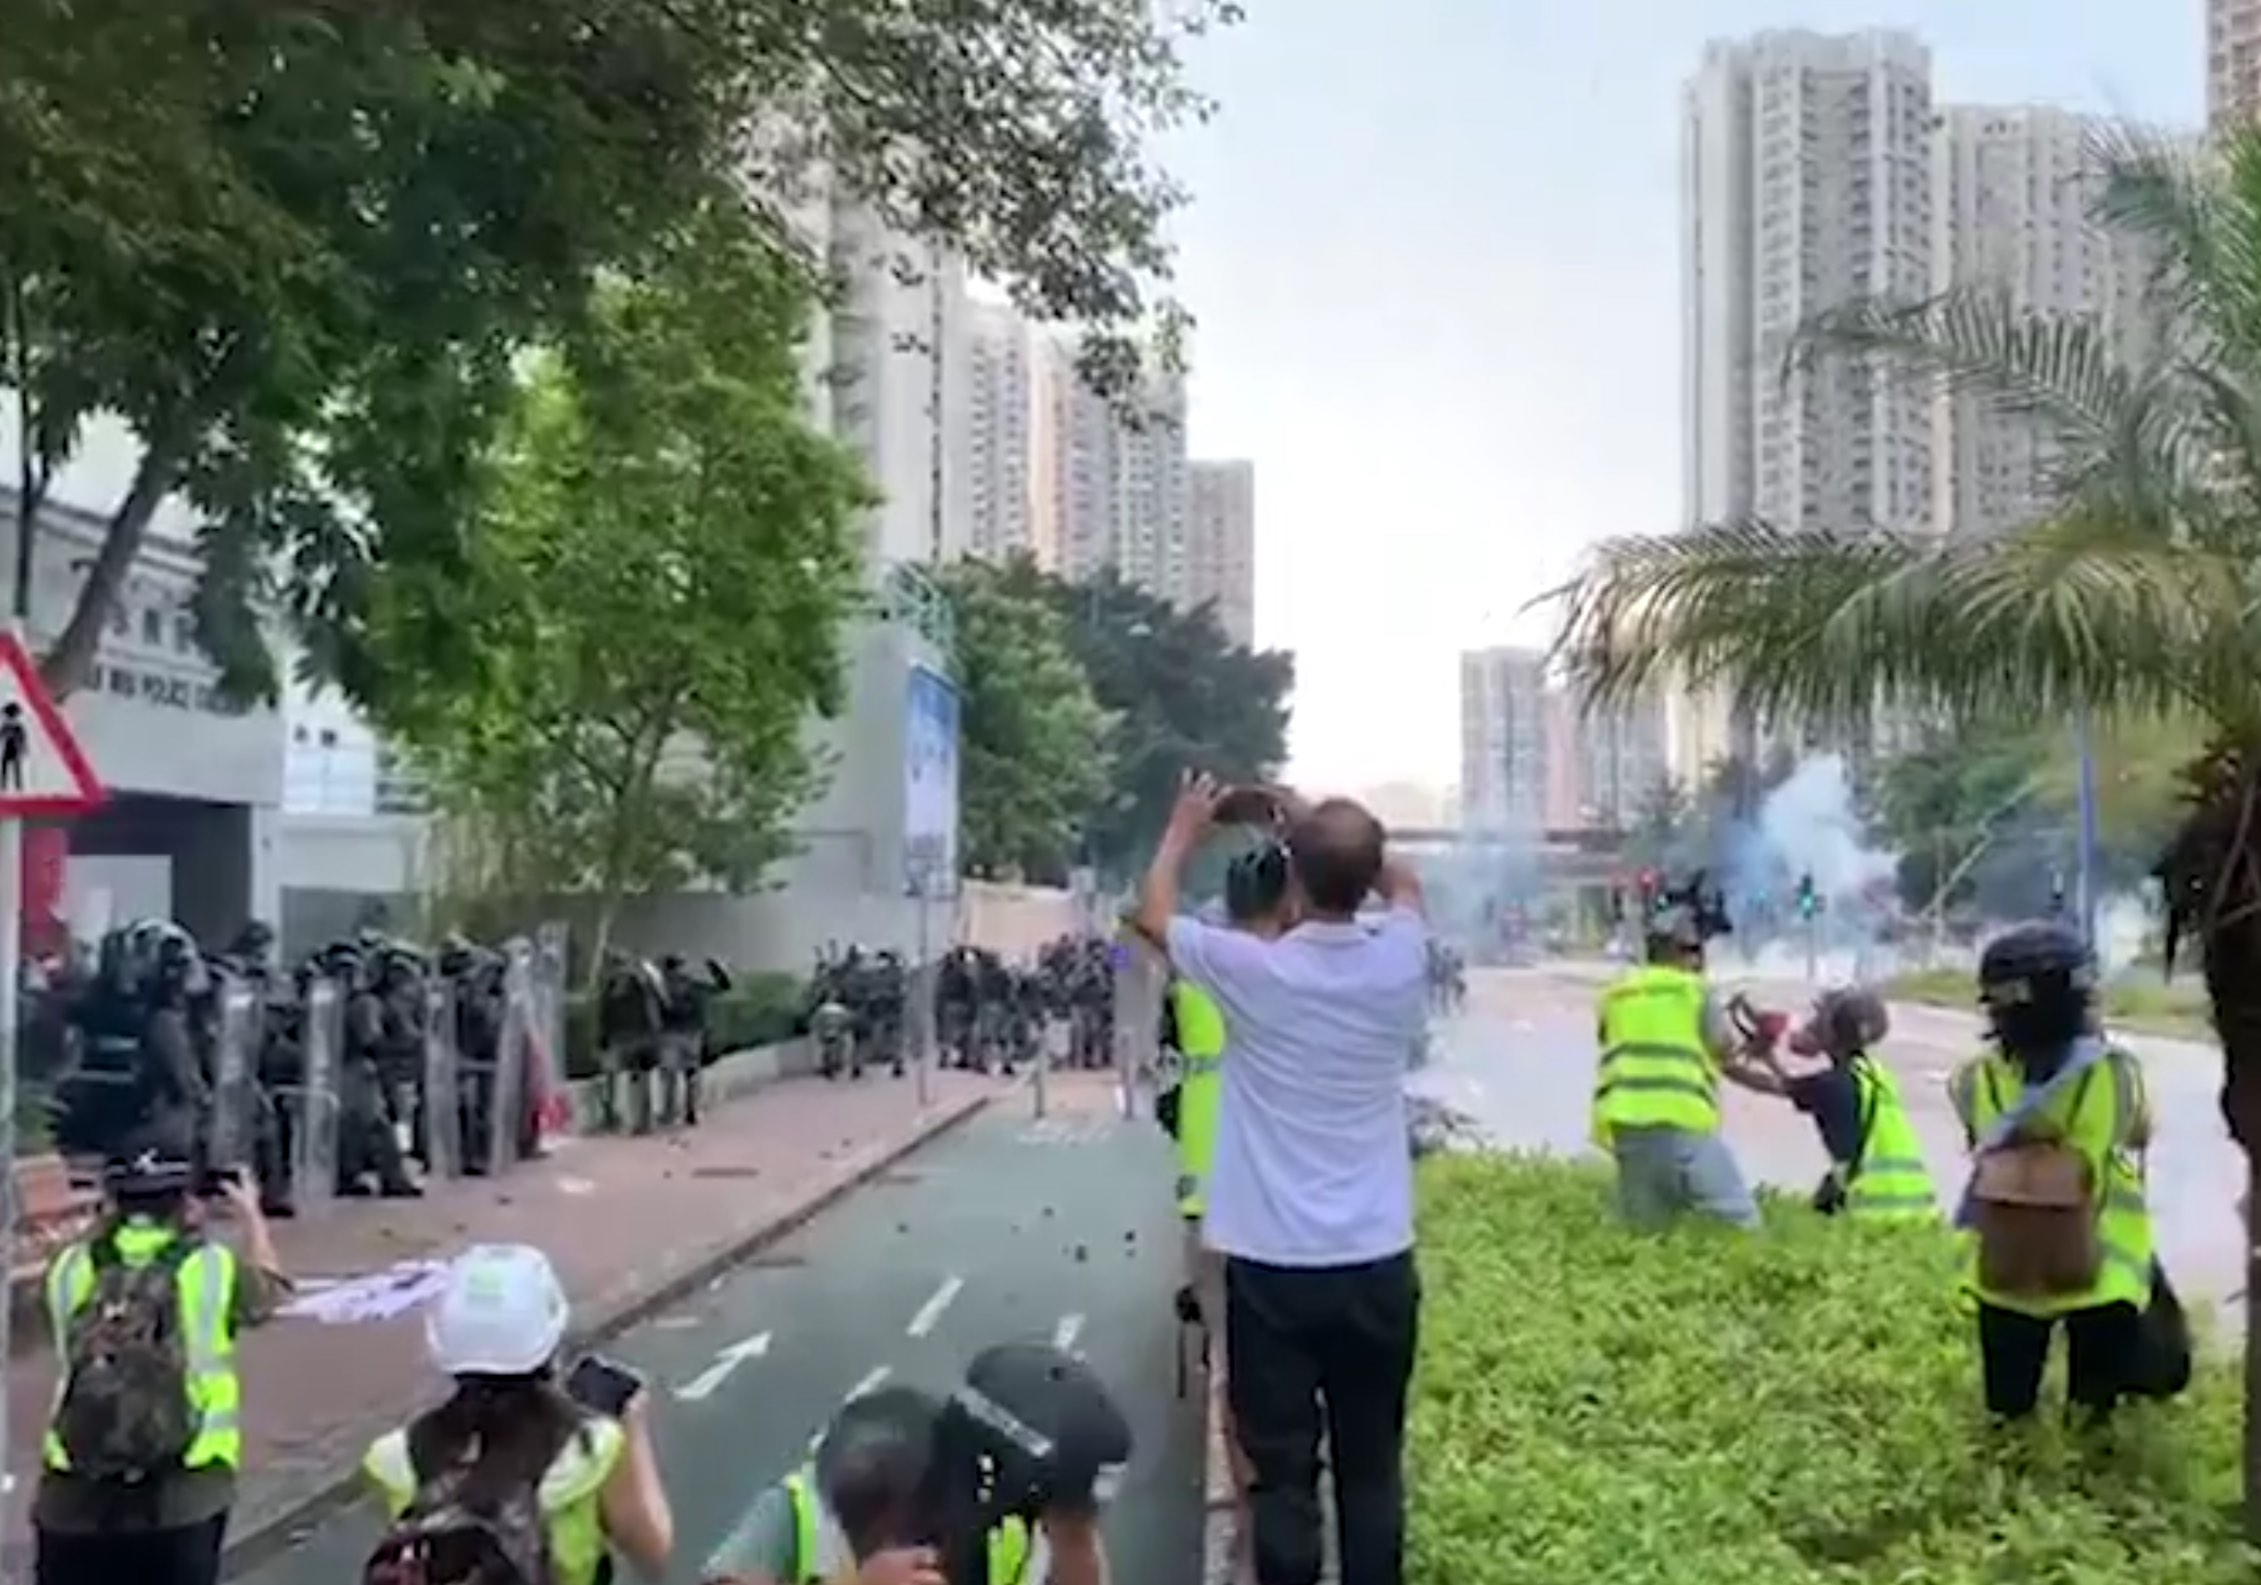 Police fire tear gas at a crowd of stone-throwing protesters outside the Tin Shui Wai police station this afternoon. Screengrab via RTHK video.